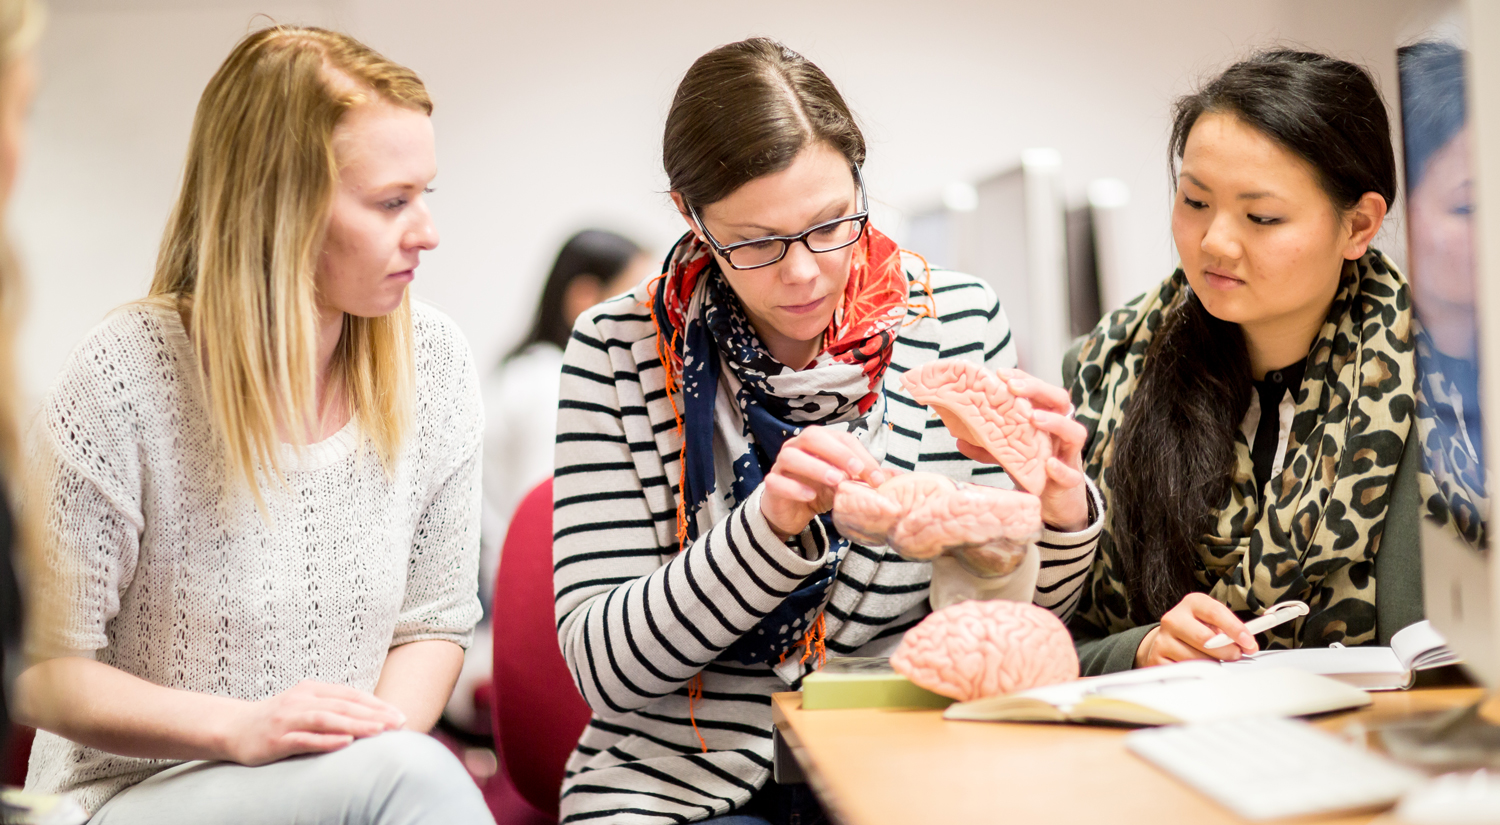 Professor Silke Paulmann from the Department of Psychology is sitting in the middle of the shot with a plastic model of the human brain which is partially taken apart. A student is sitting either side of her, looking at something she is pointing at on the model.